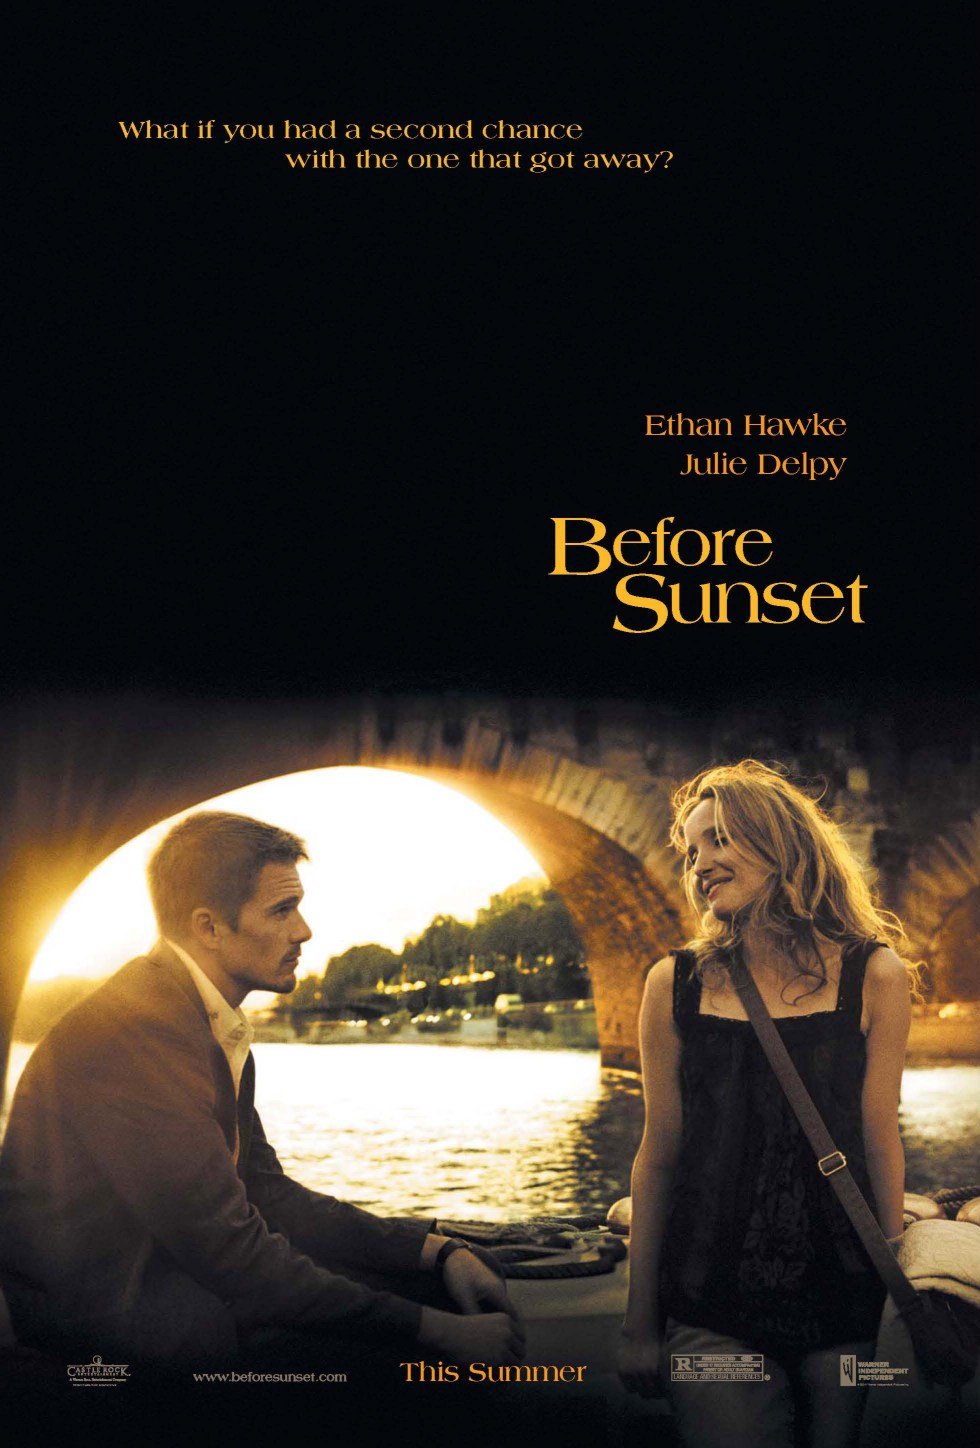 Poster of the movie Before Sunset